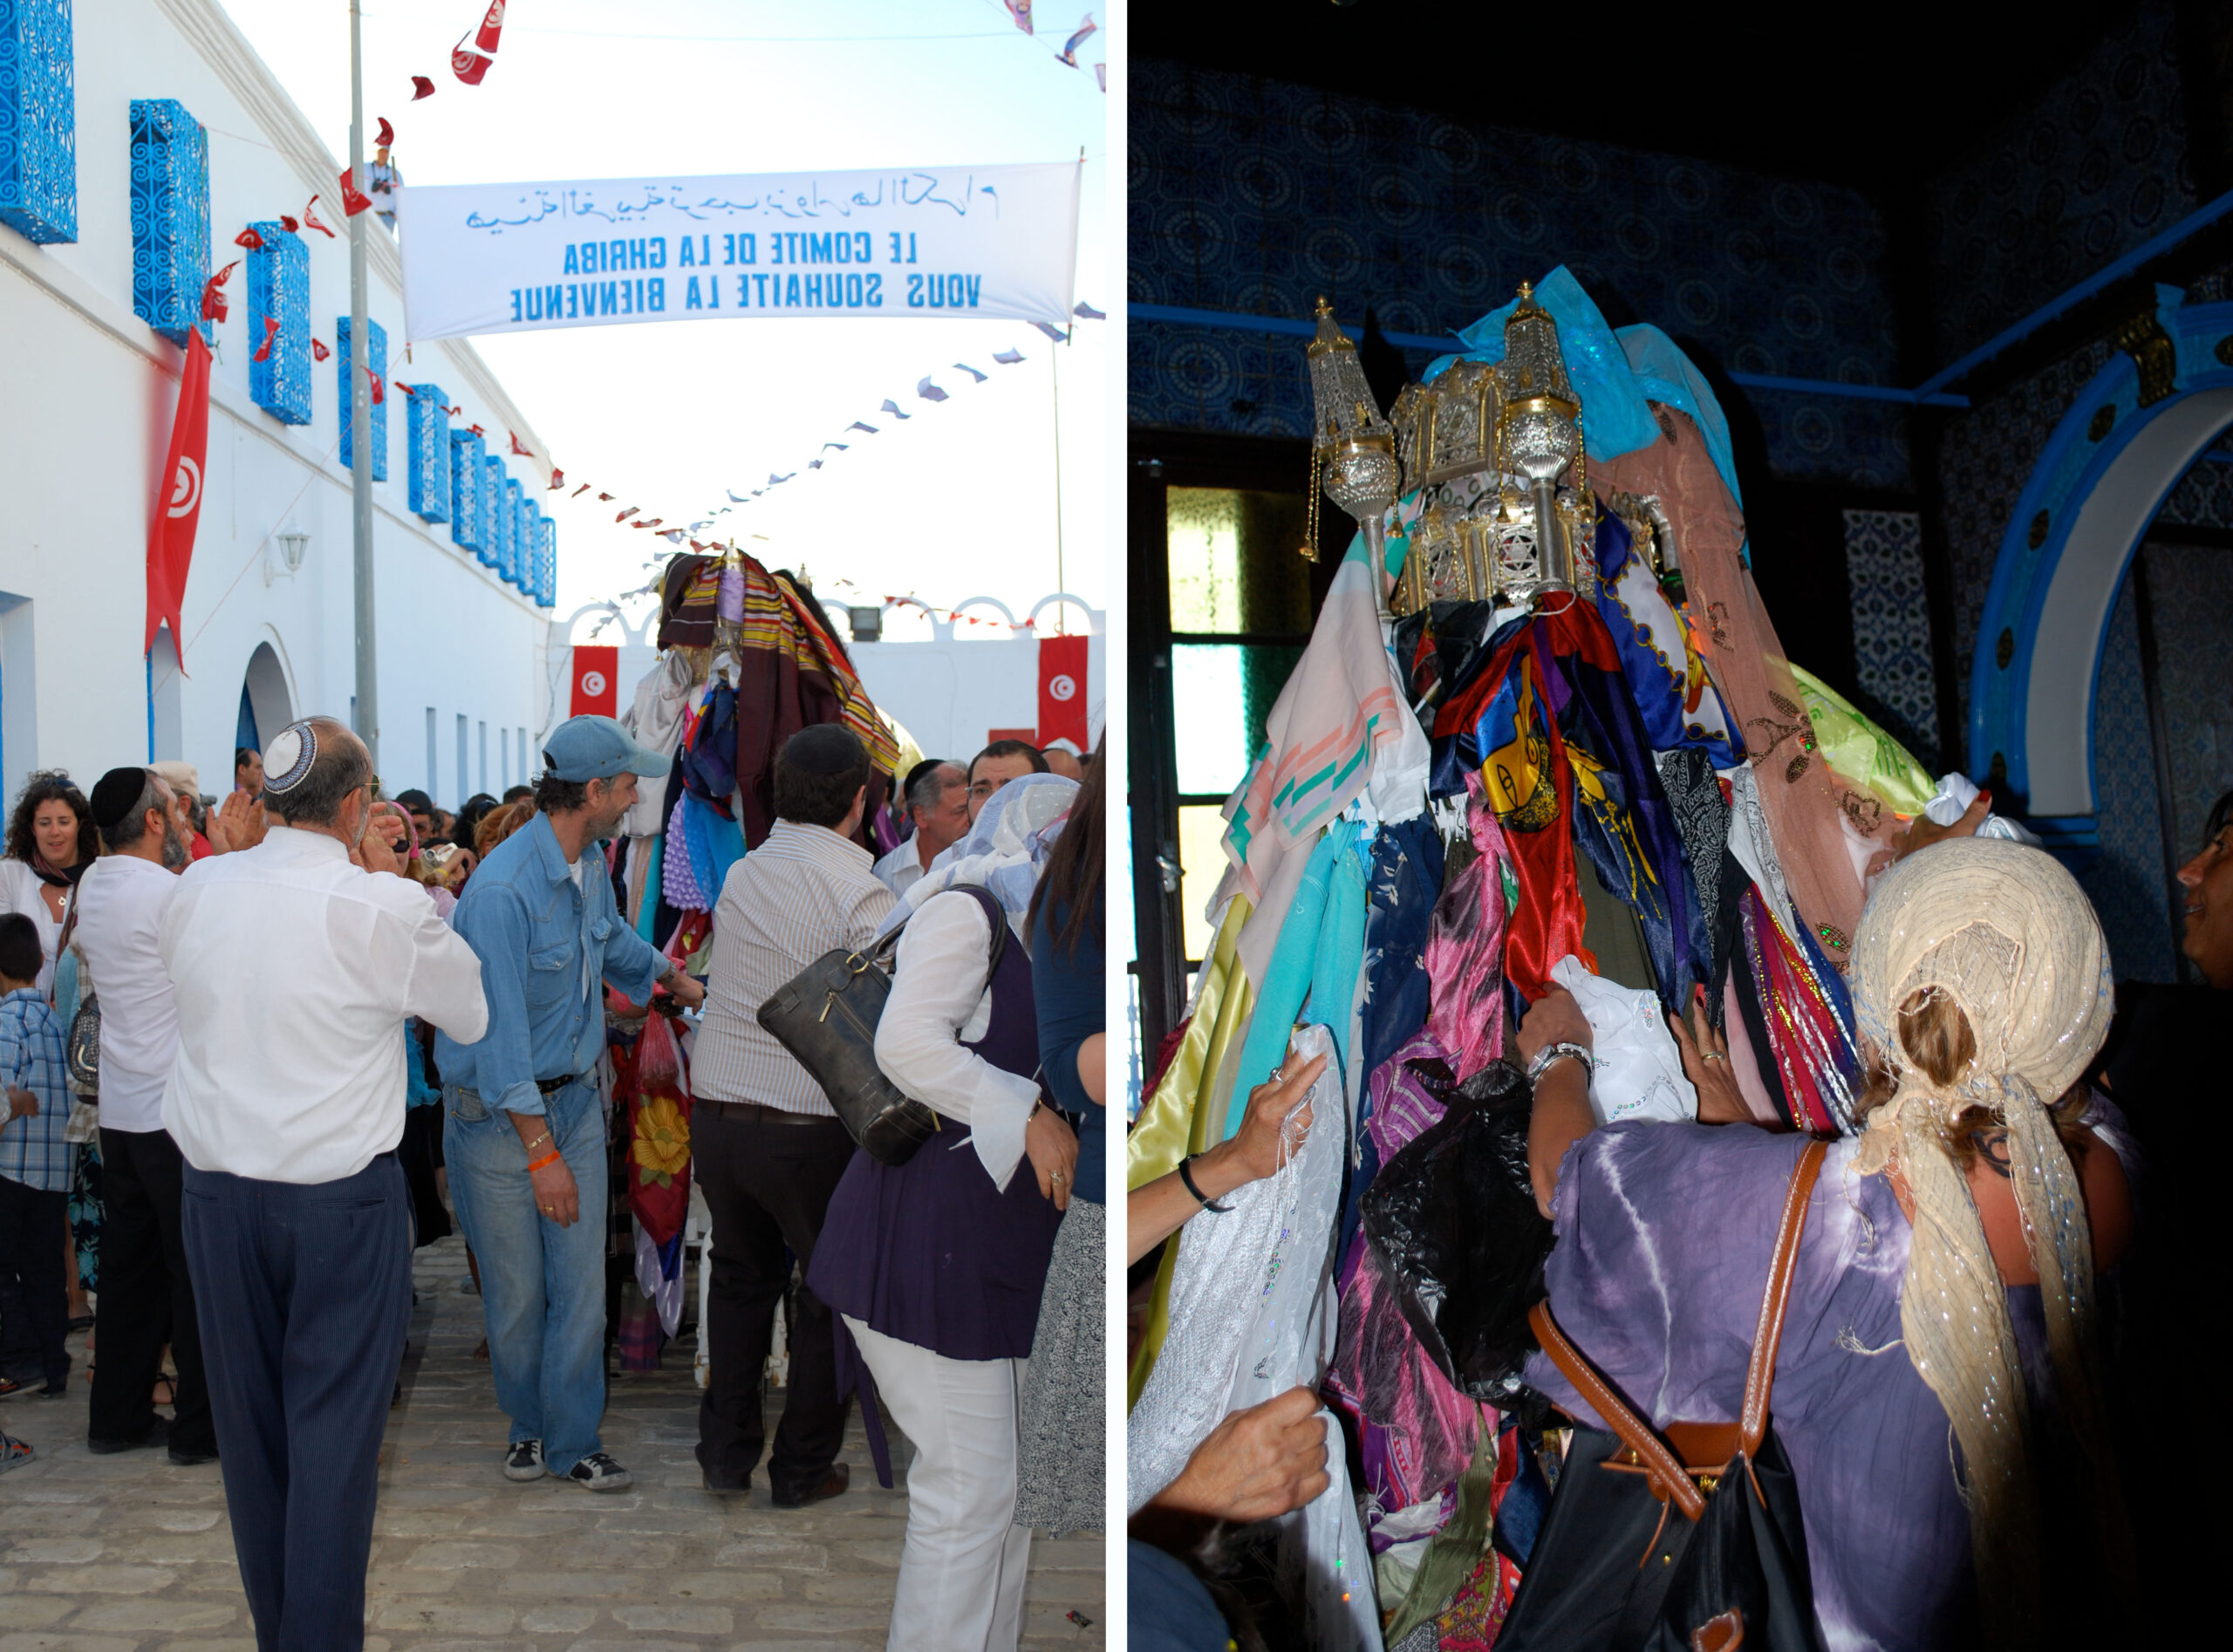 Left: Menara in procession outside of the Ghriba synagogue; right: women dress the menara with scarves (PilotGirl, CC BY-NC-SA 2.0)